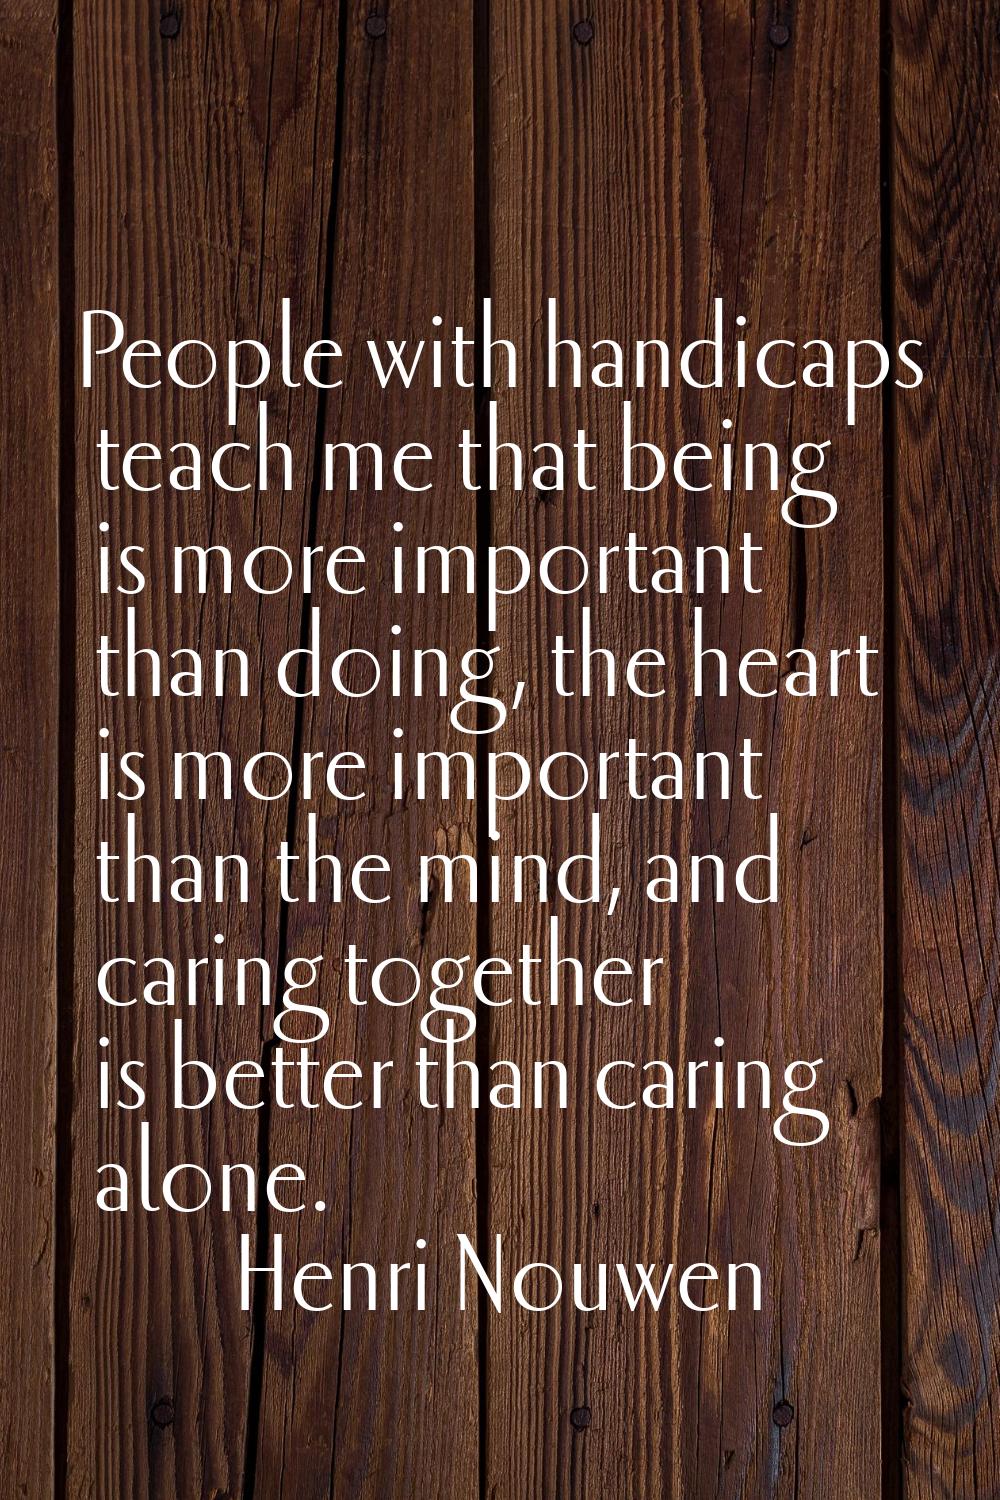 People with handicaps teach me that being is more important than doing, the heart is more important